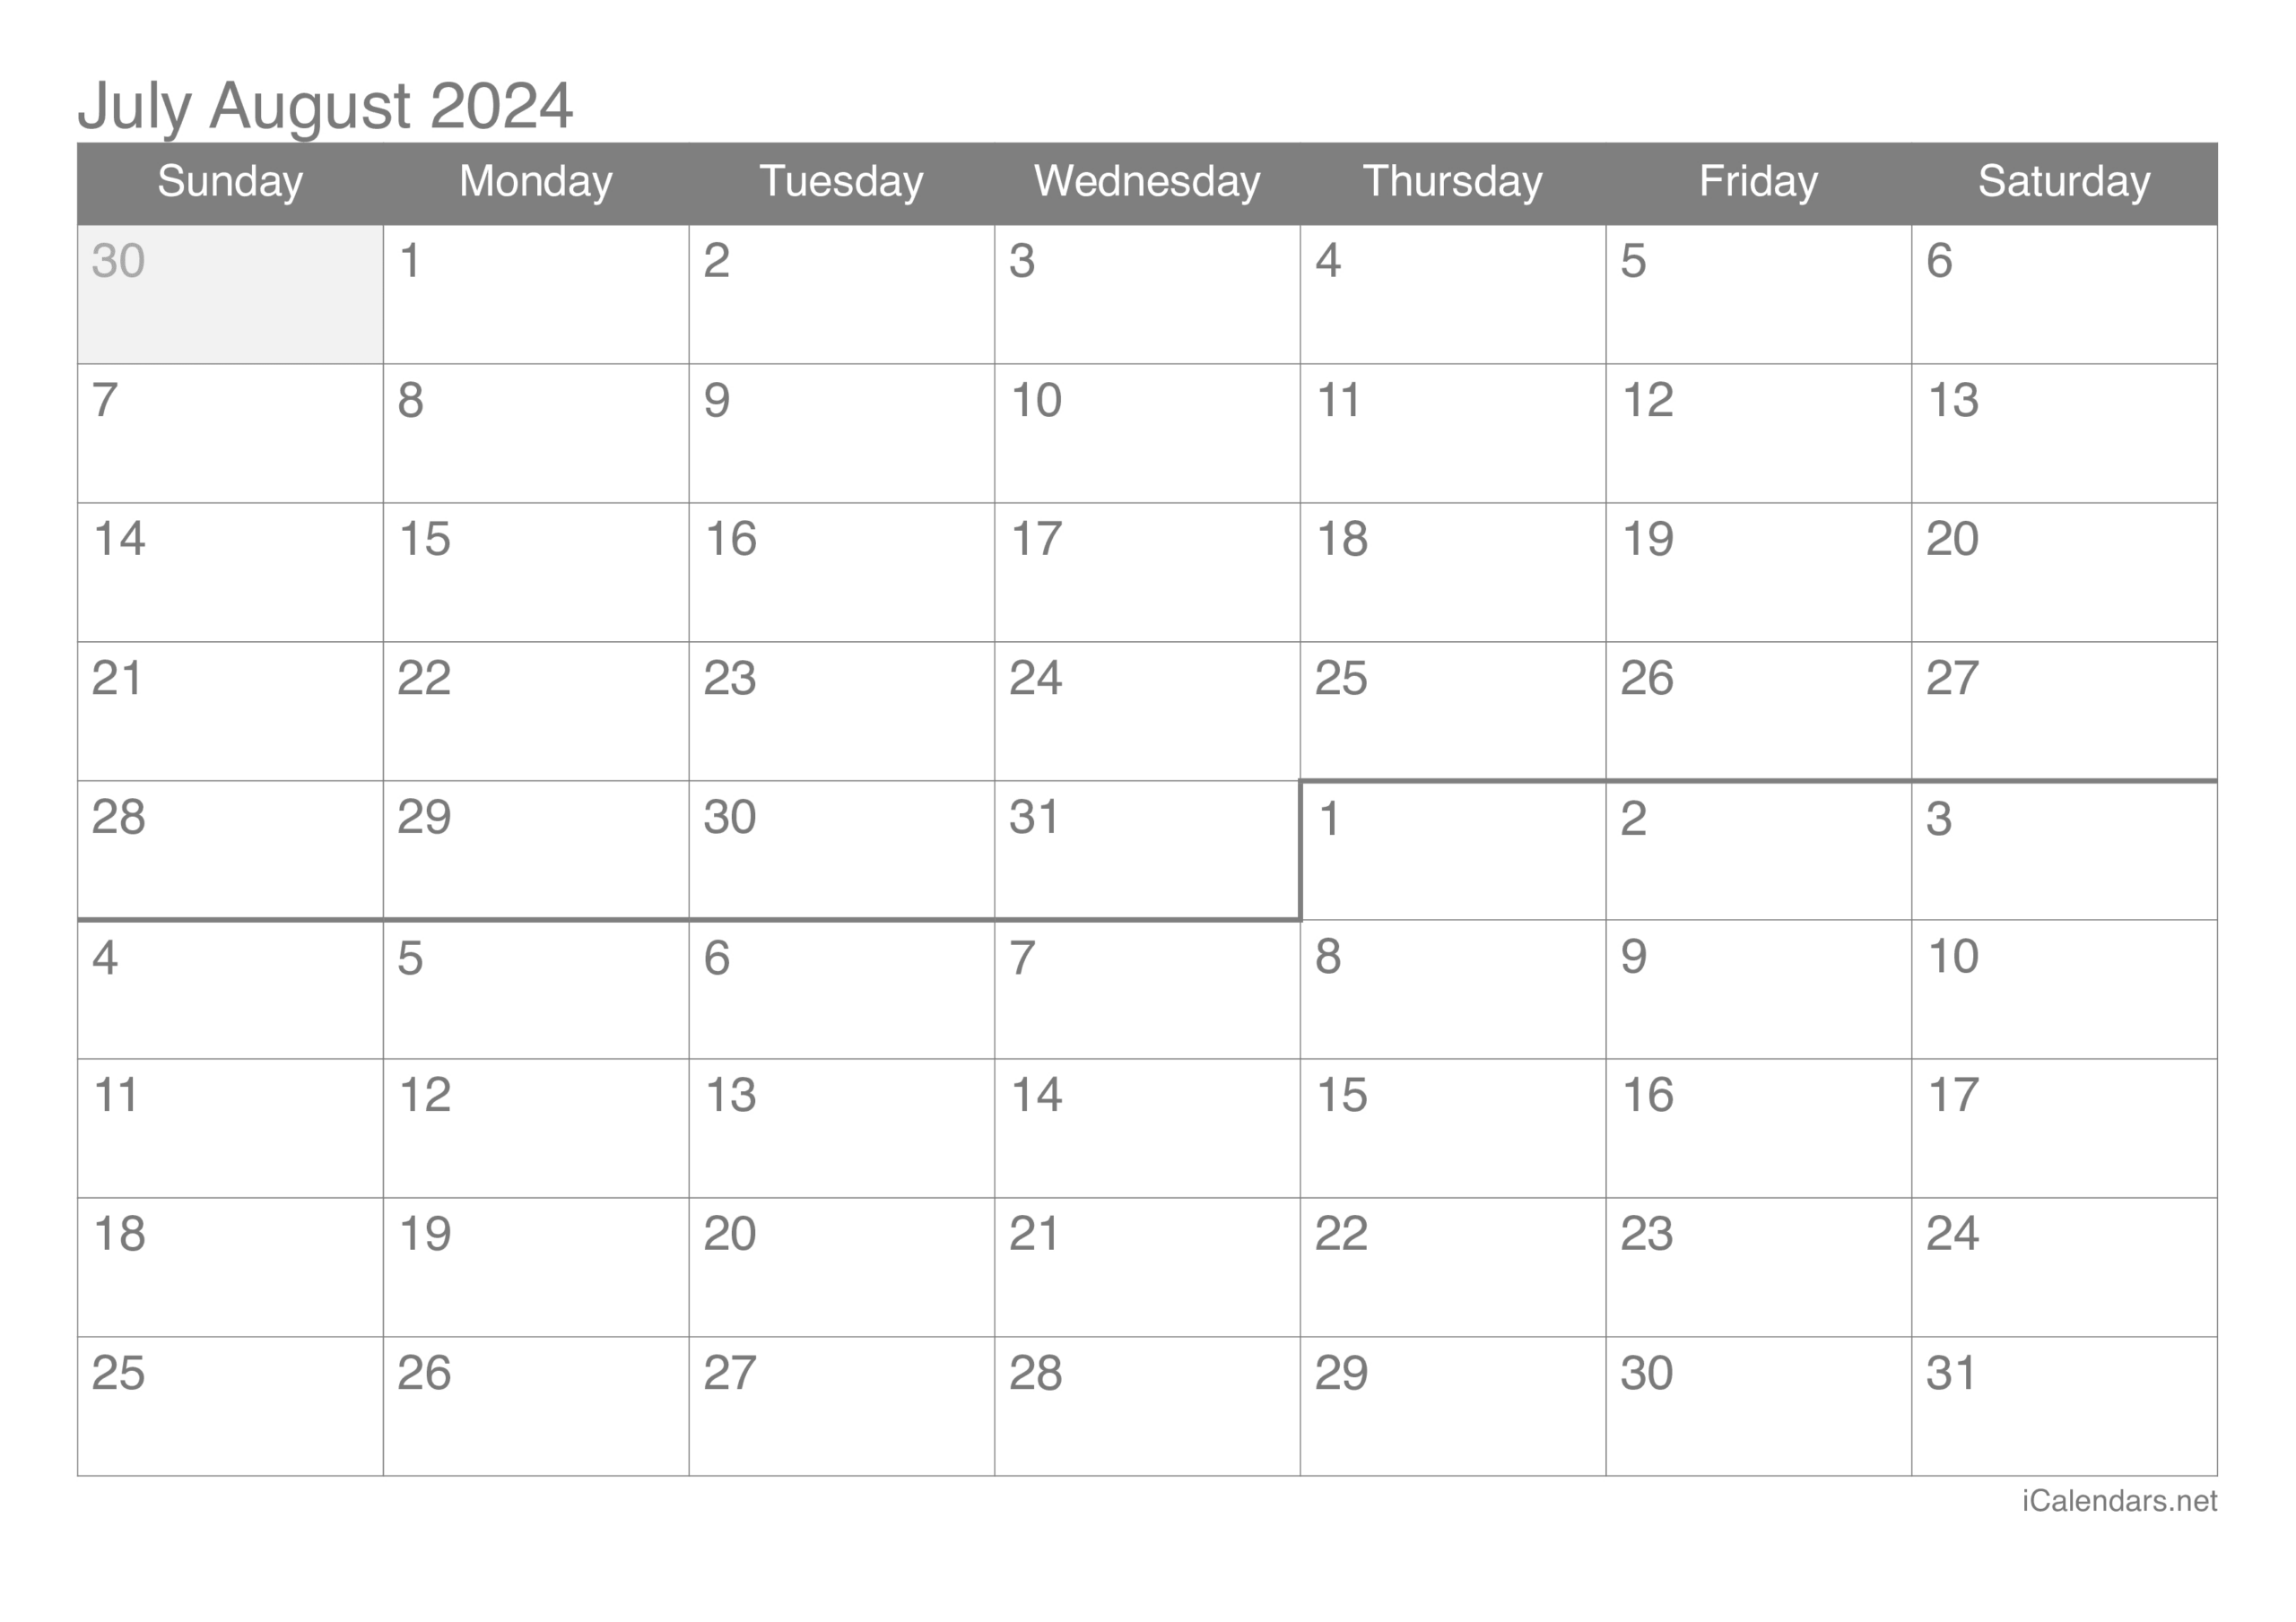 July And August 2024 Printable Calendar intended for Blank July August 2024 Calendar